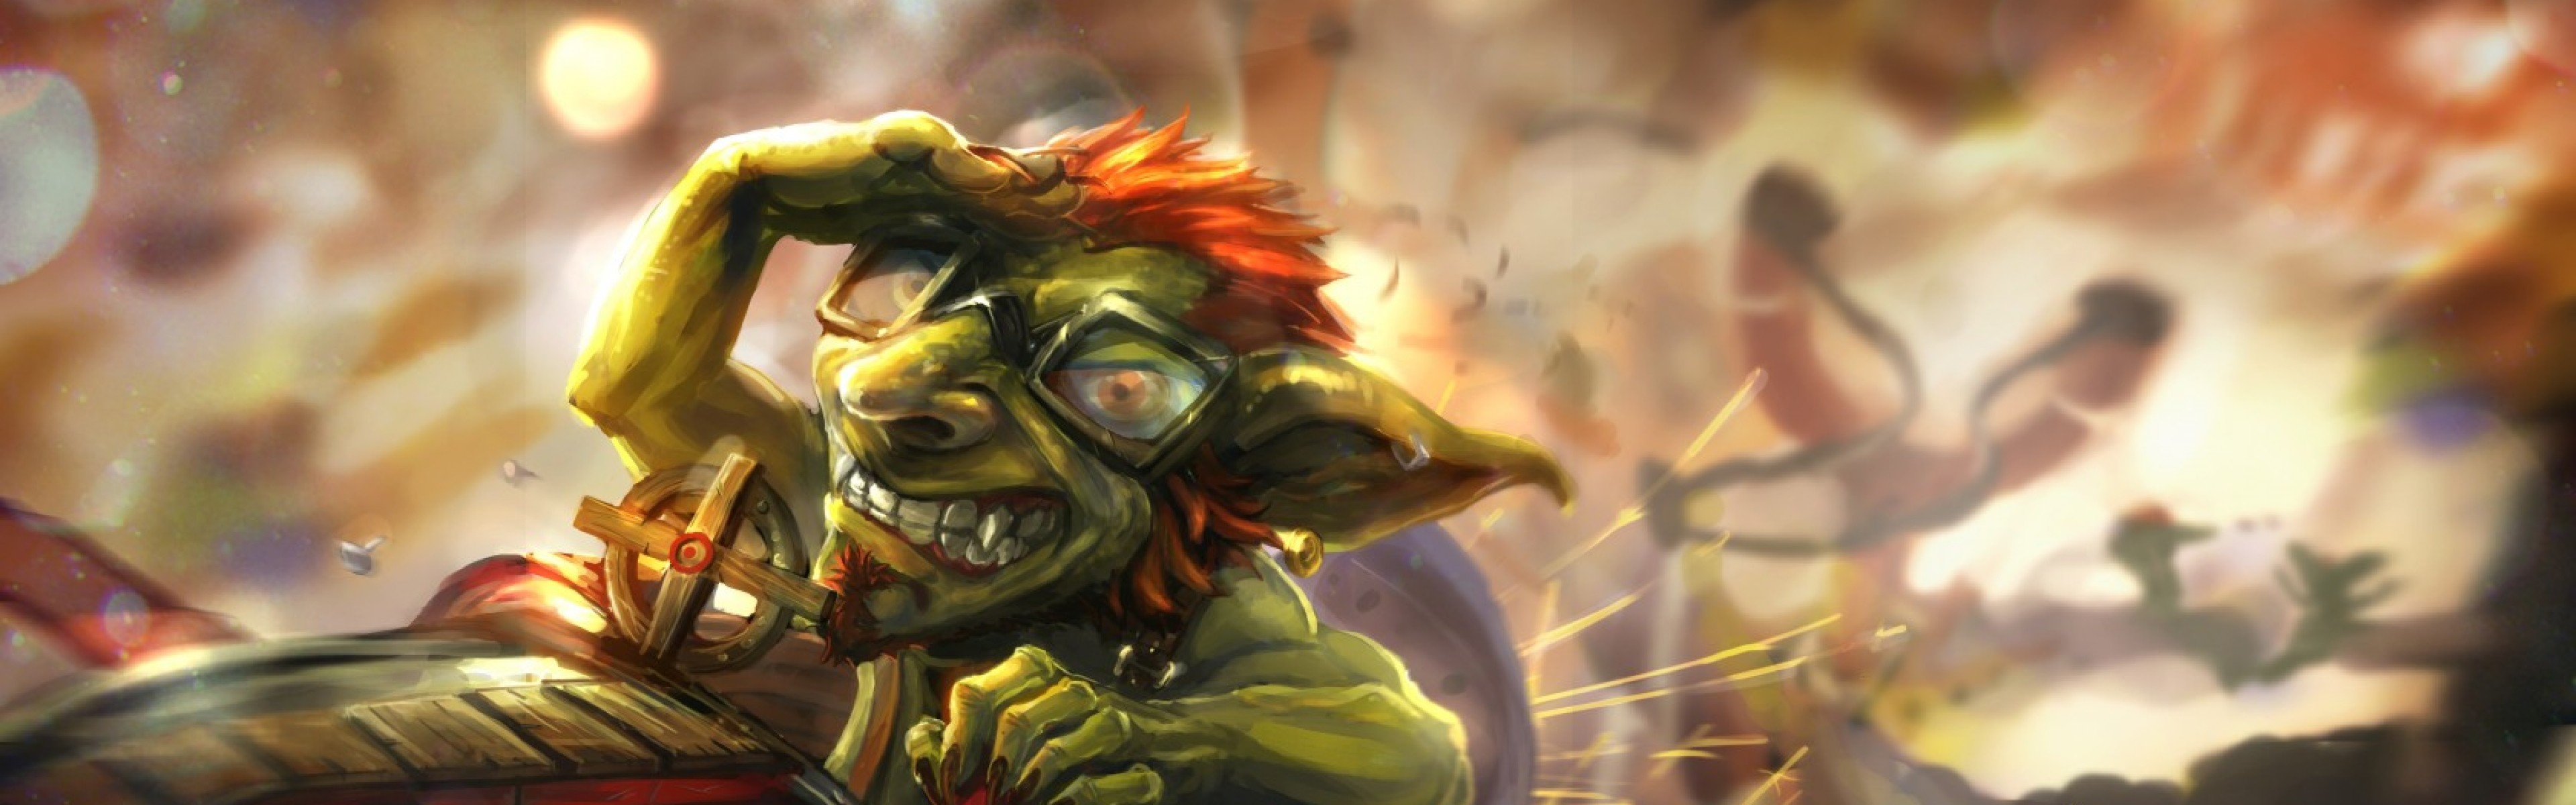 3840x1200 Preview wallpaper hearthstone, hearthstone heroes of warcraft, catapult,  goblin, dwarf 